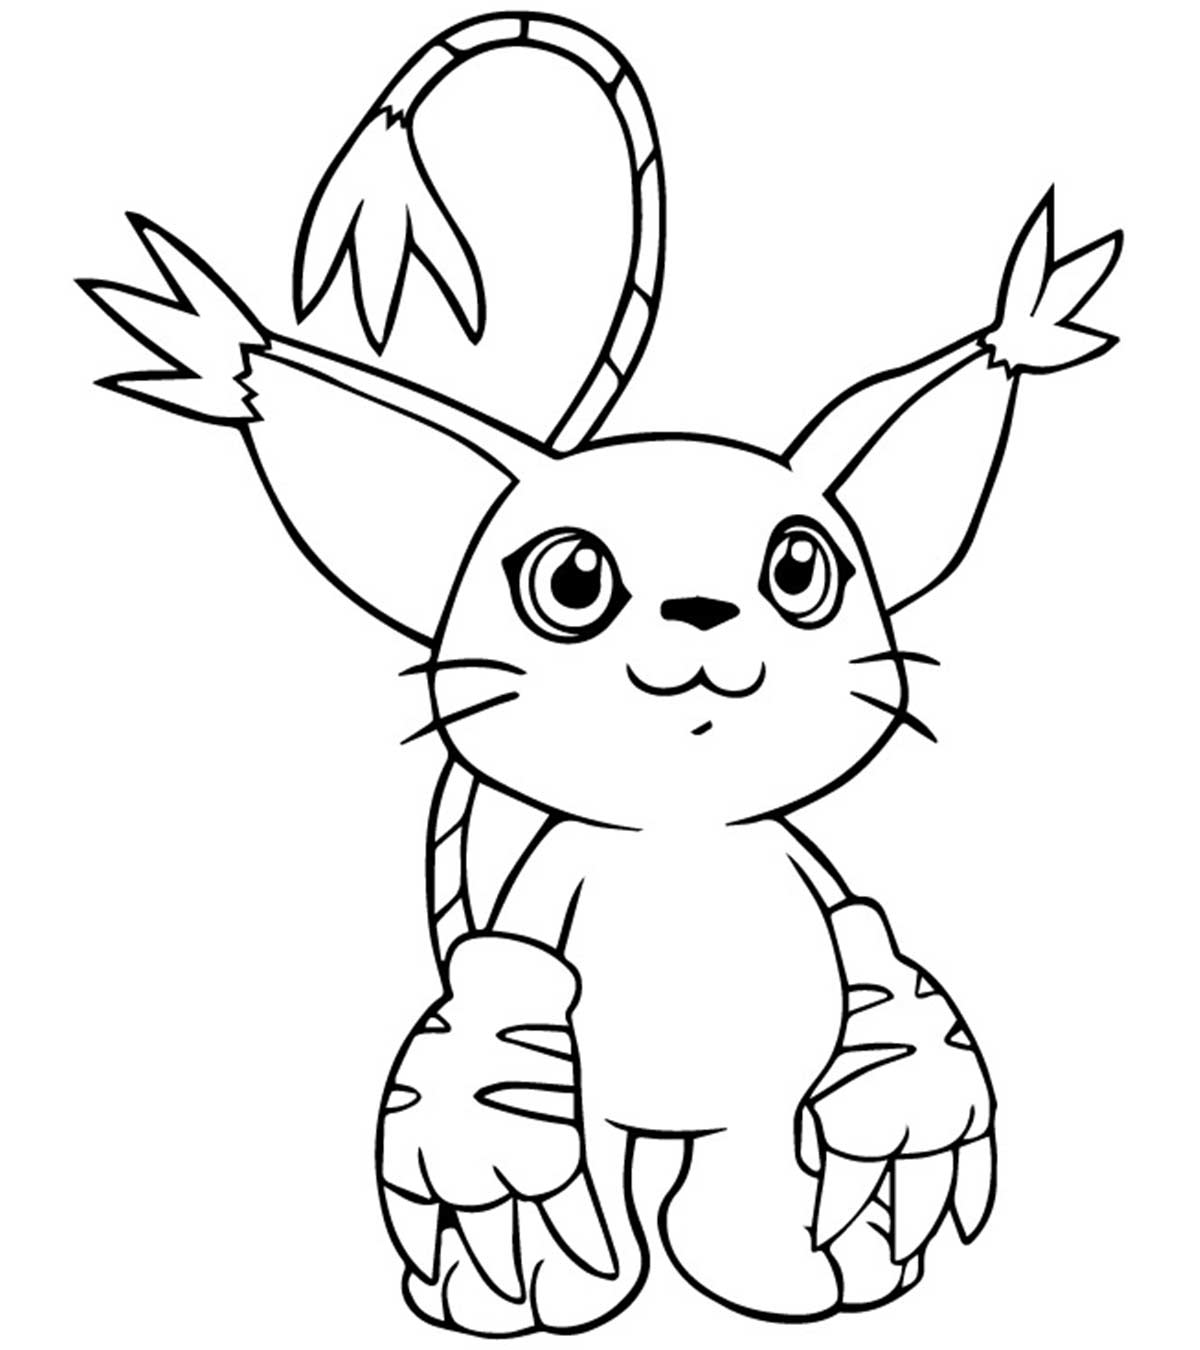 10 Lovely Digimon Coloring Pages For Your Little Ones_image